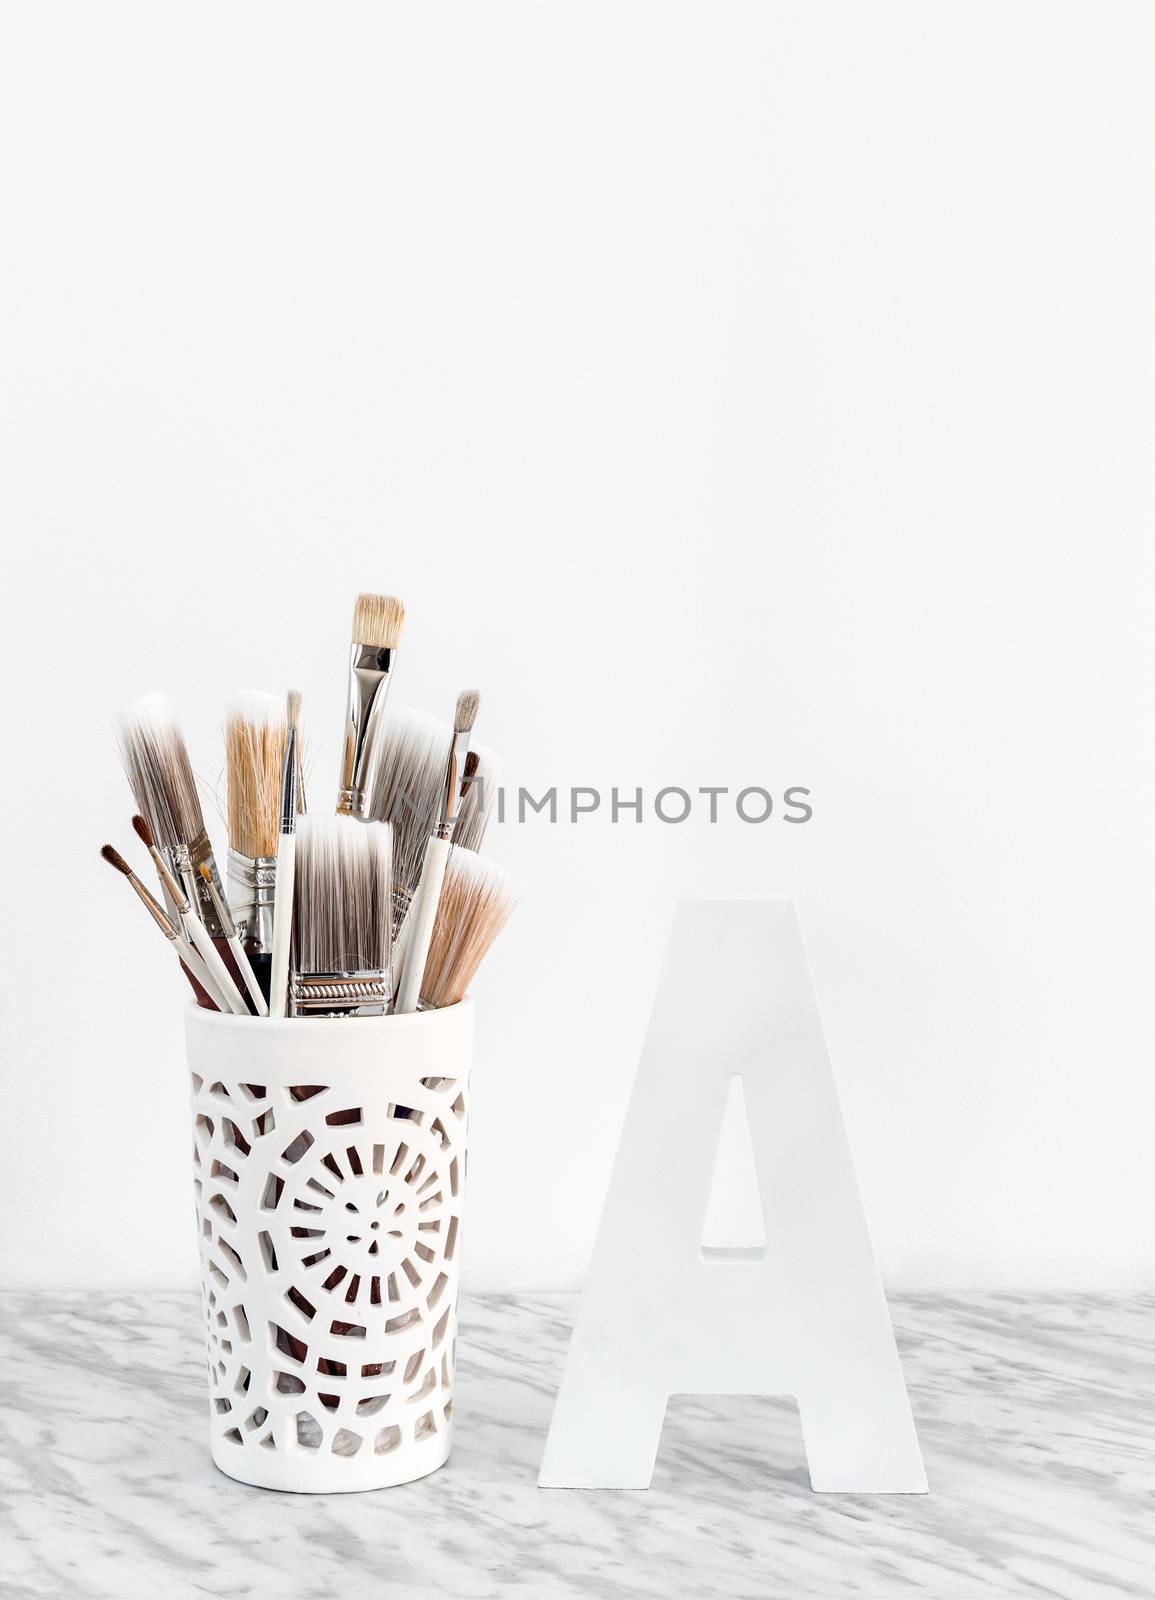 Paintbrushes in a decorative vase and white letter A on marble surface.